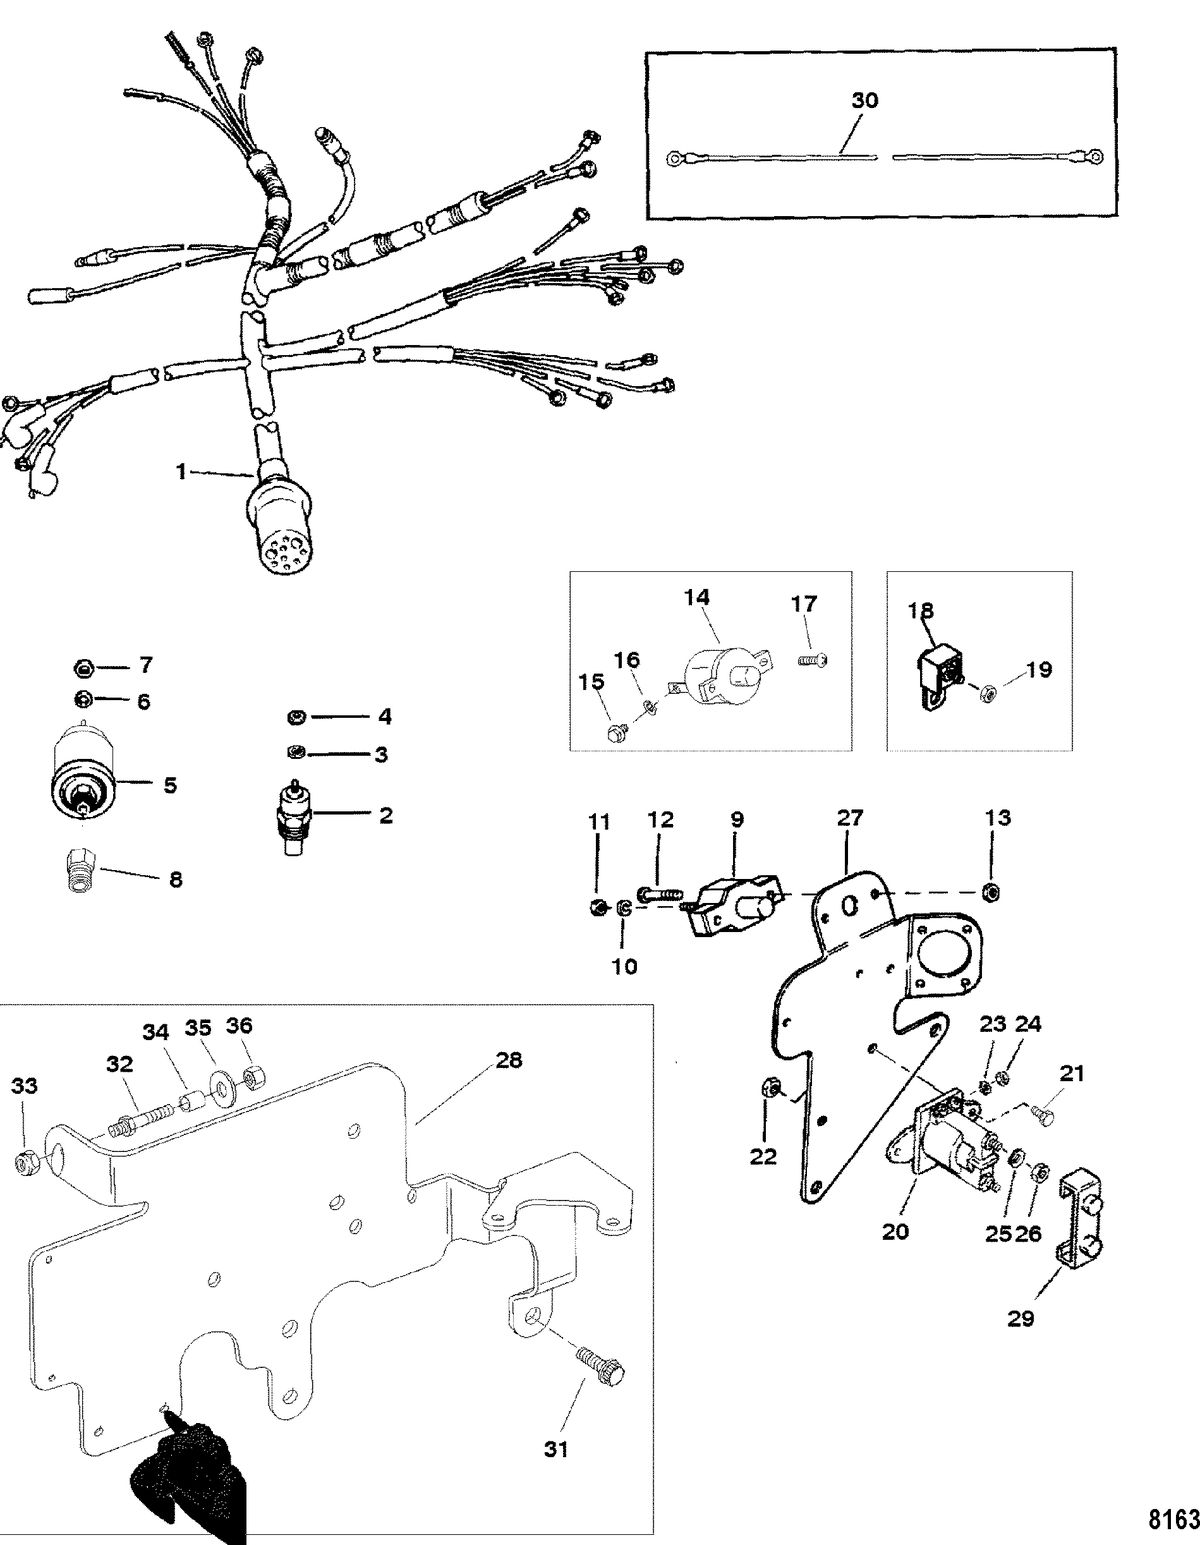 MERCRUISER 3.0L/LX ALPHA ONE Wiring Harness and Electrical Components